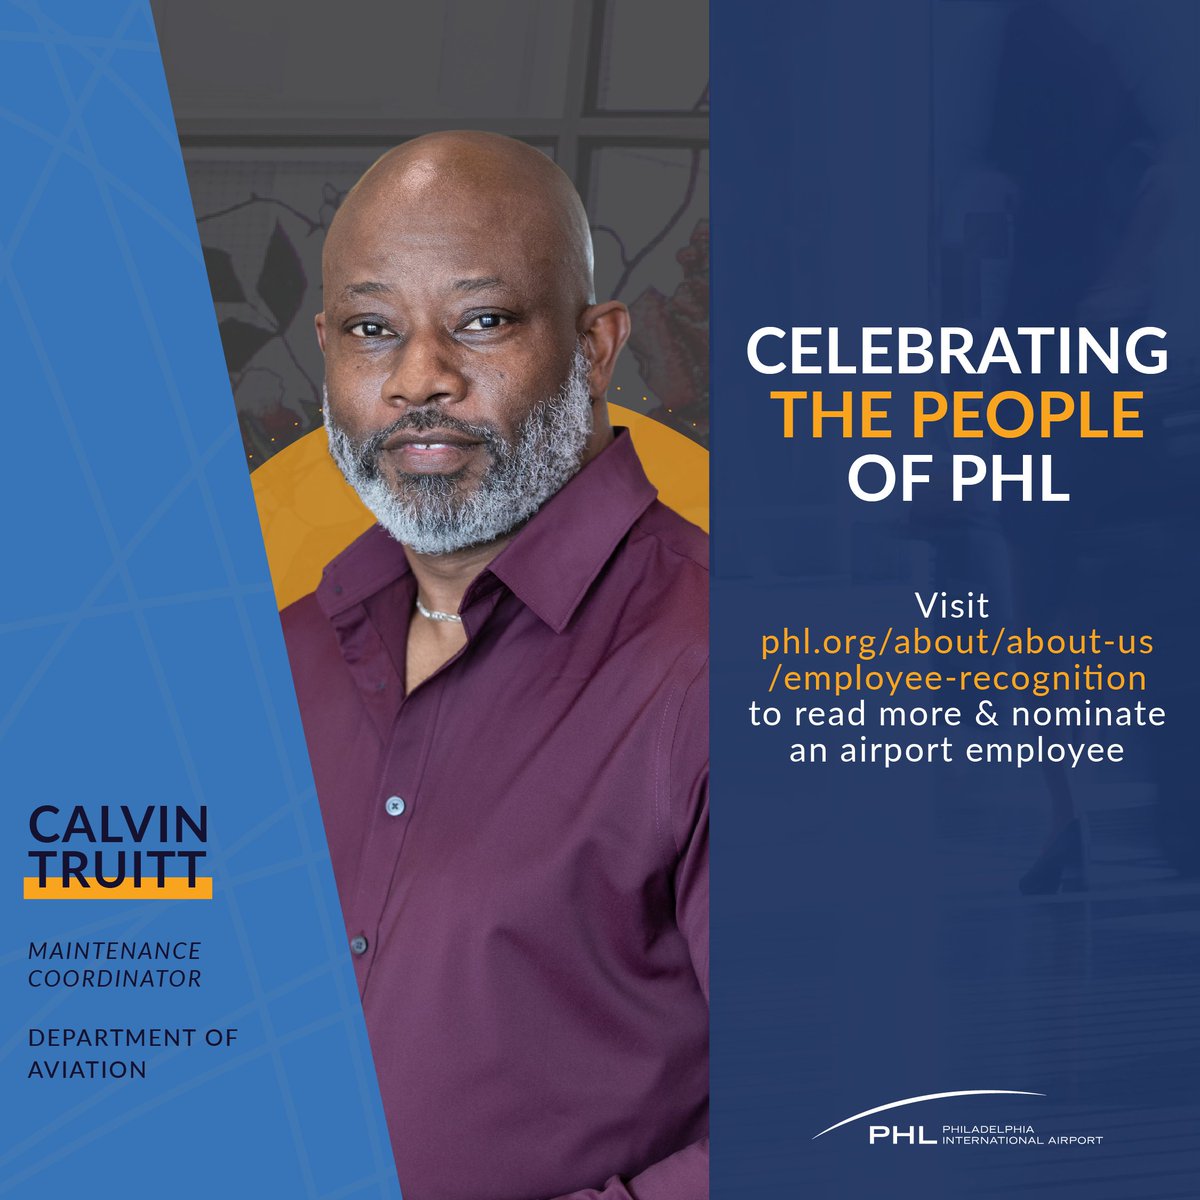 Dept of Aviation Maintenance Coordinator Calvin Truitt recently received the “Unsung Heroes” award from #PHLAirport's Employee Recognition Program. 'The most meaningful part of my job is passenger satisfaction.' Read about this 13-year airport veteran: ow.ly/Vft550Rtqhj